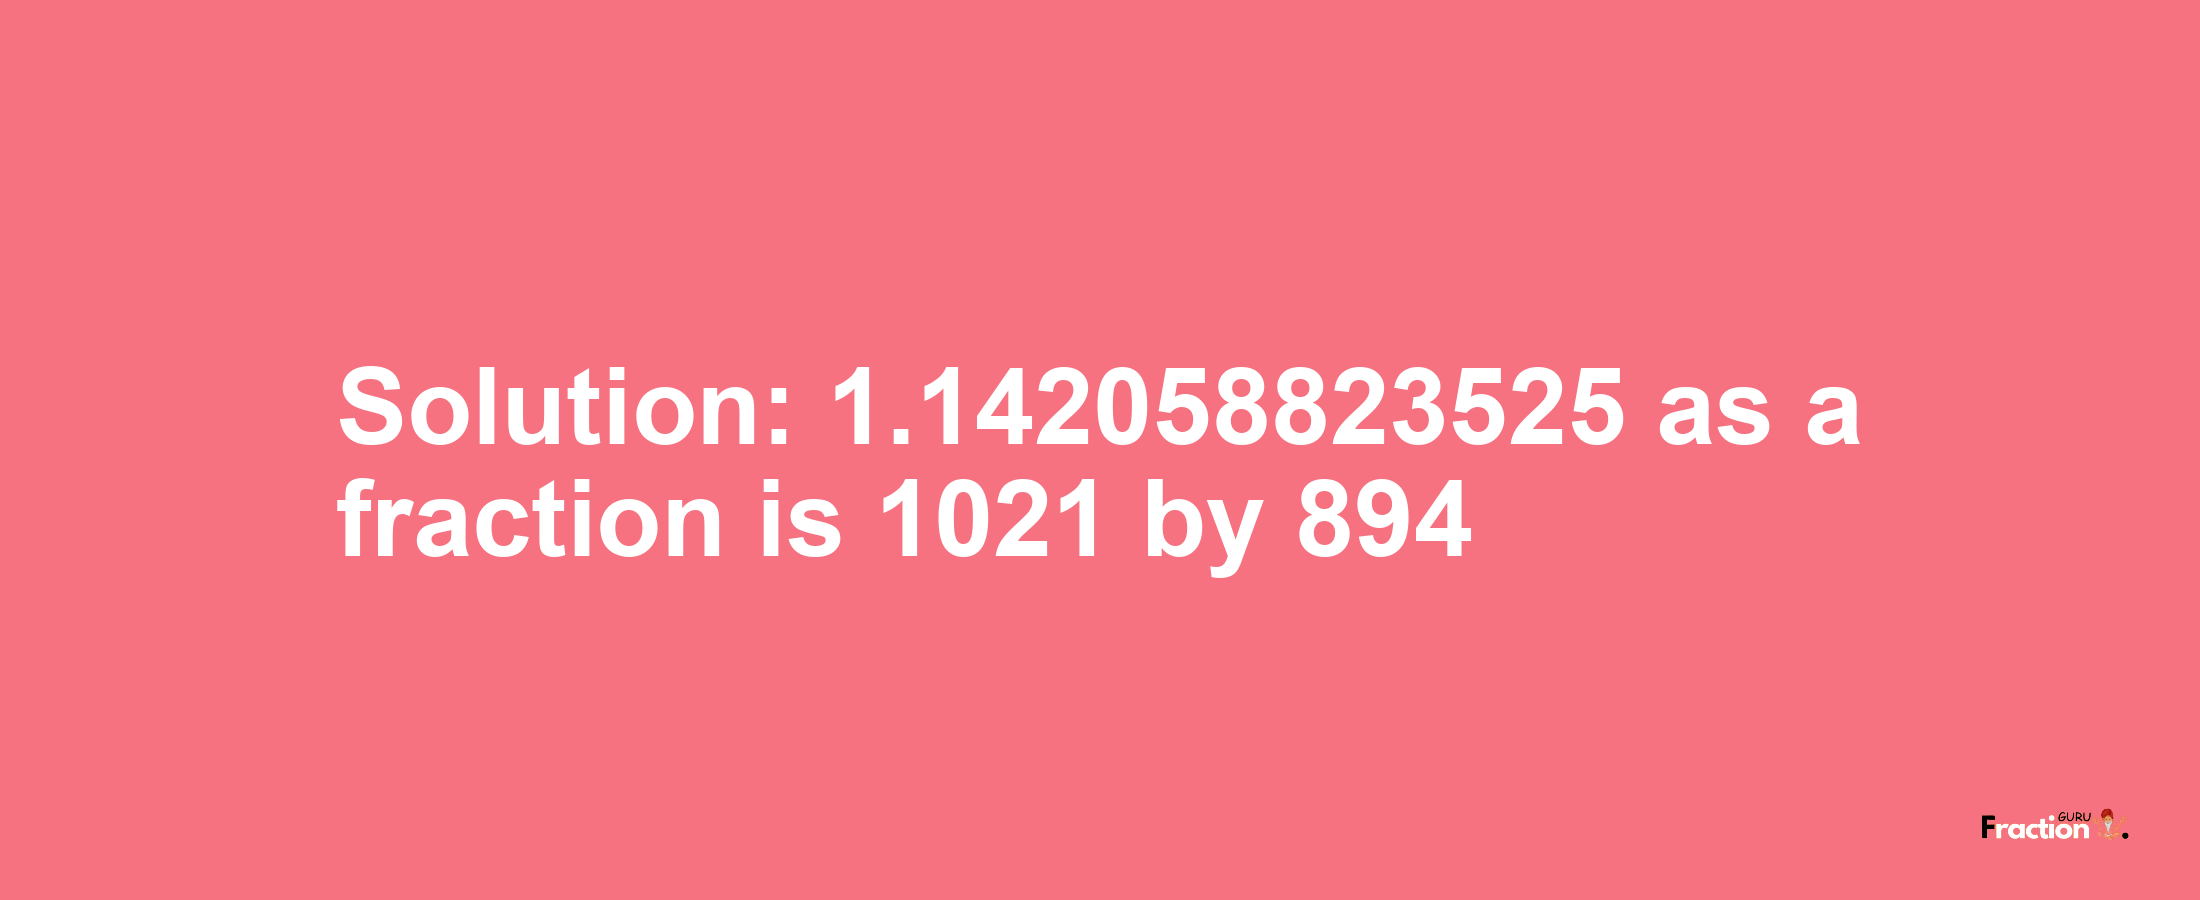 Solution:1.142058823525 as a fraction is 1021/894